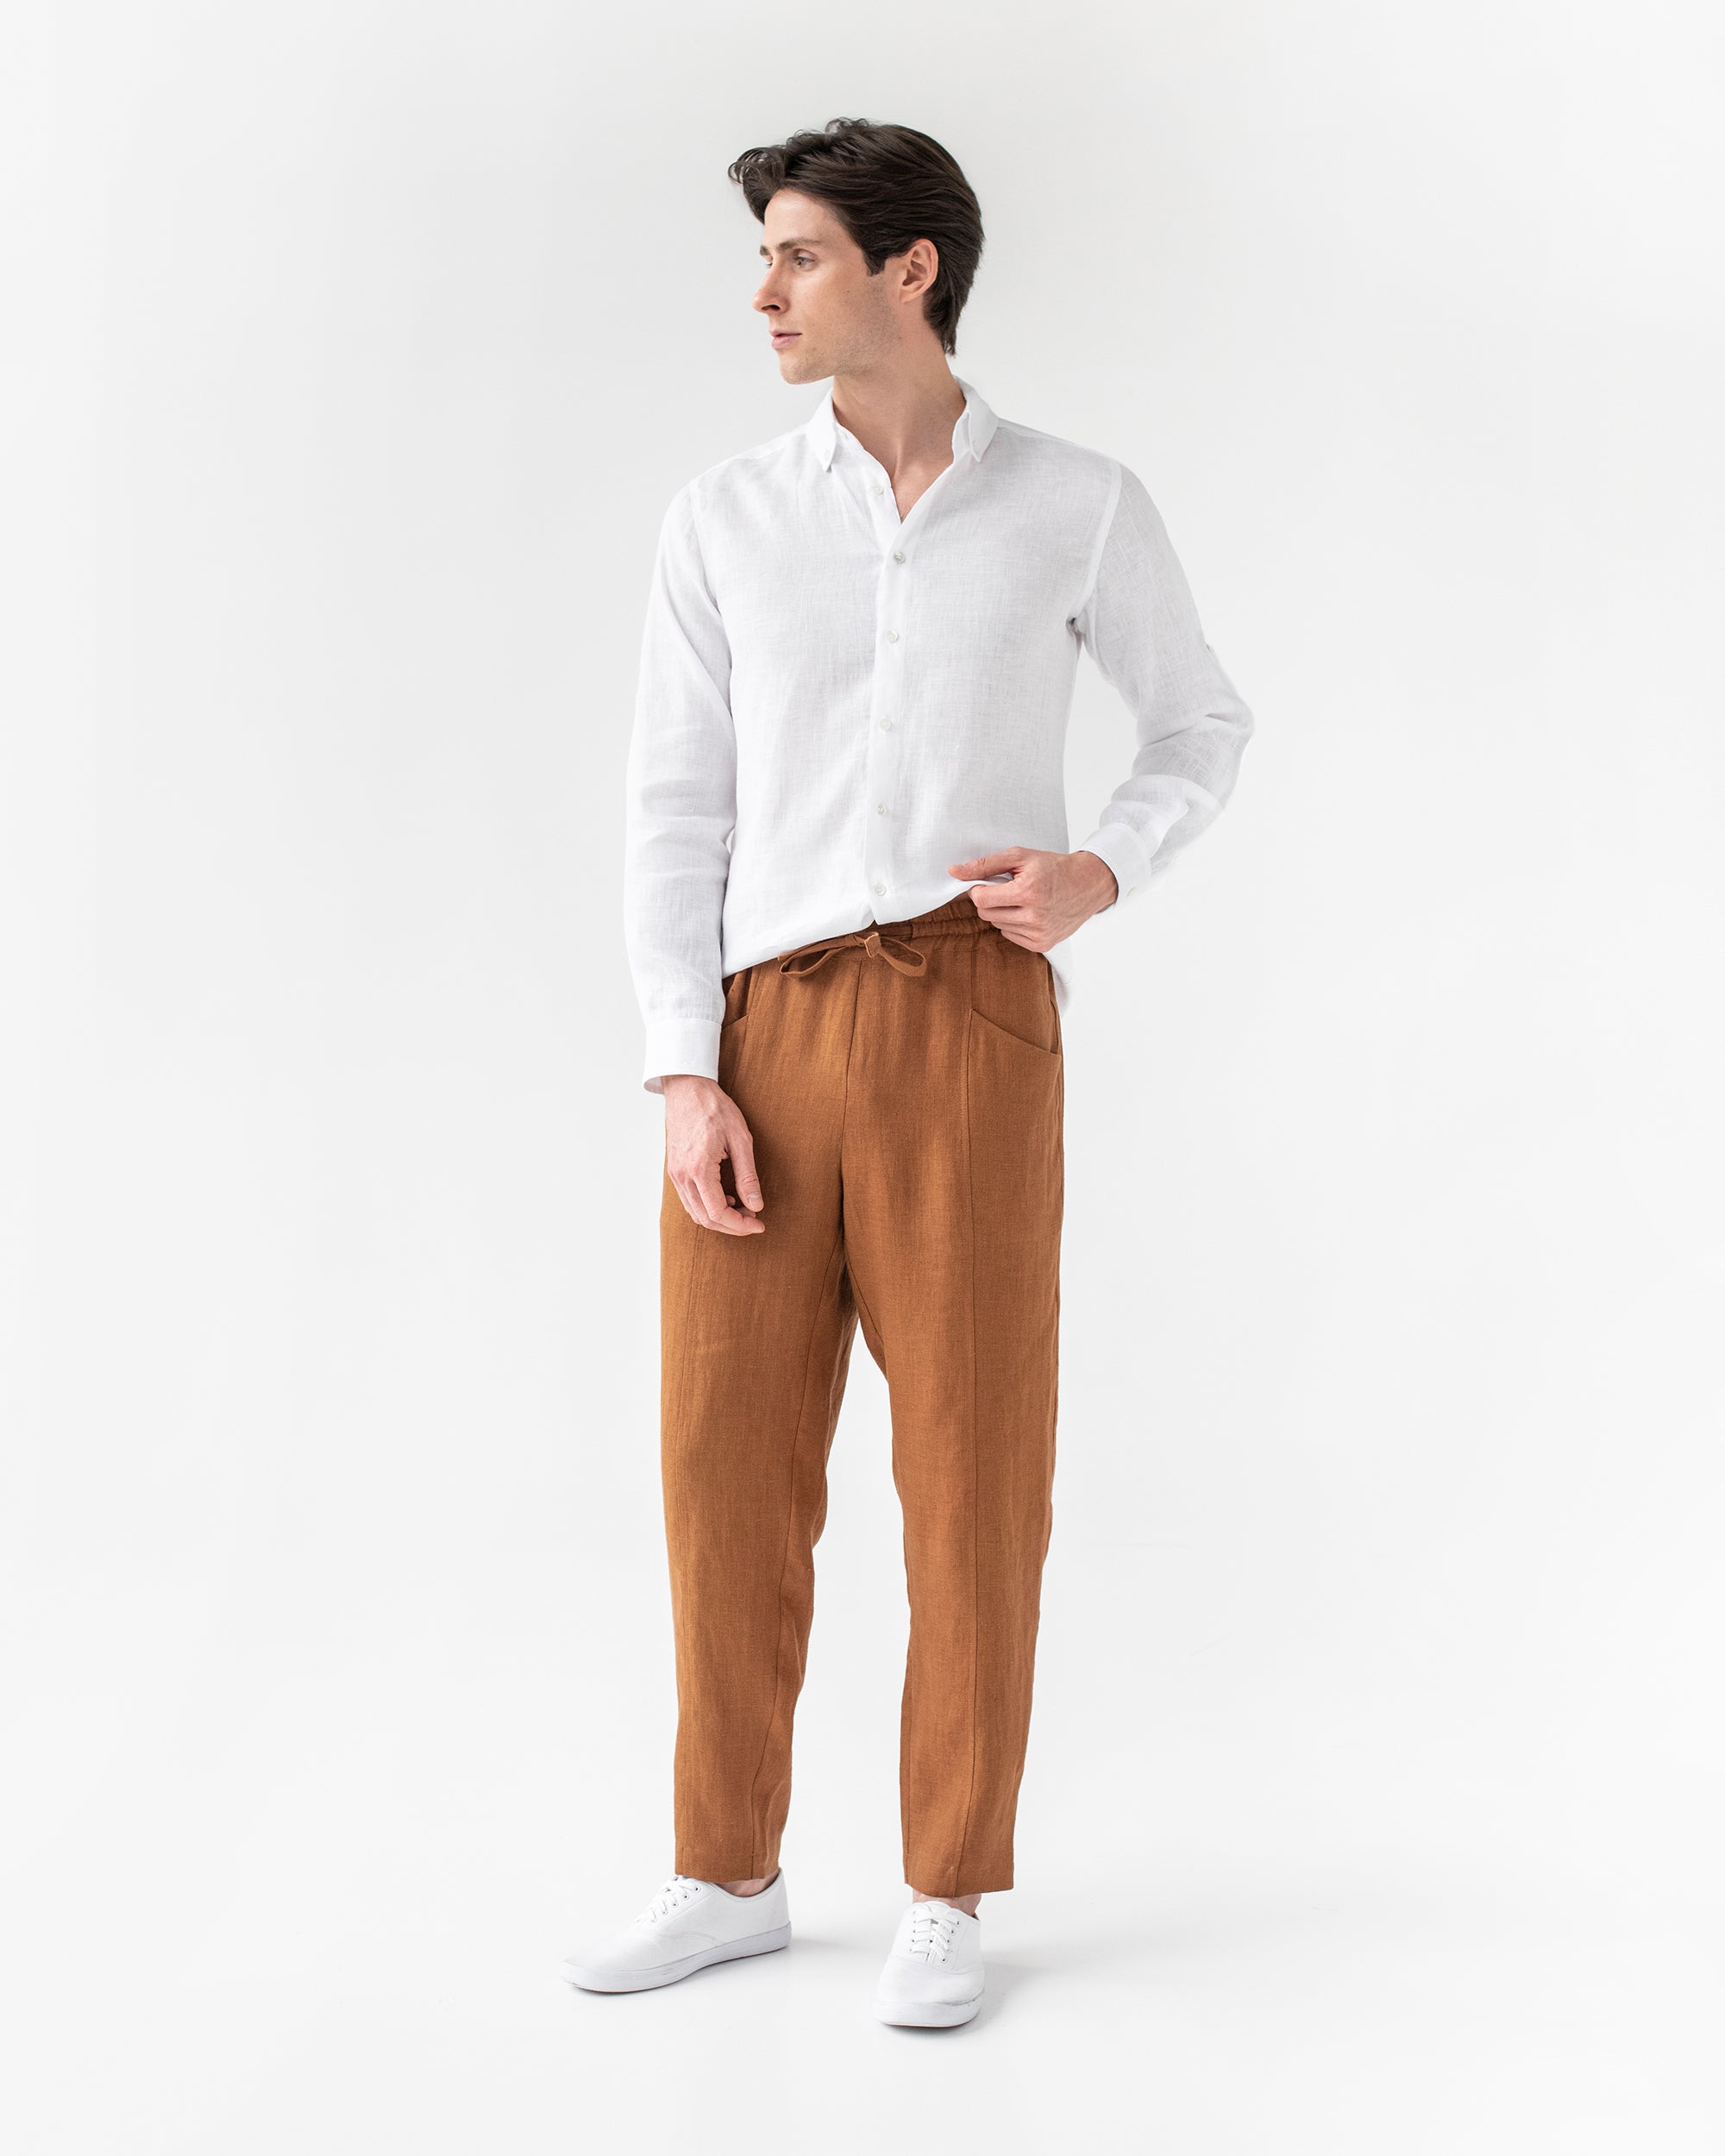 Hat and Beyond Men's Classic Slim-Fit Linen Pants with Waist Band -  Walmart.com